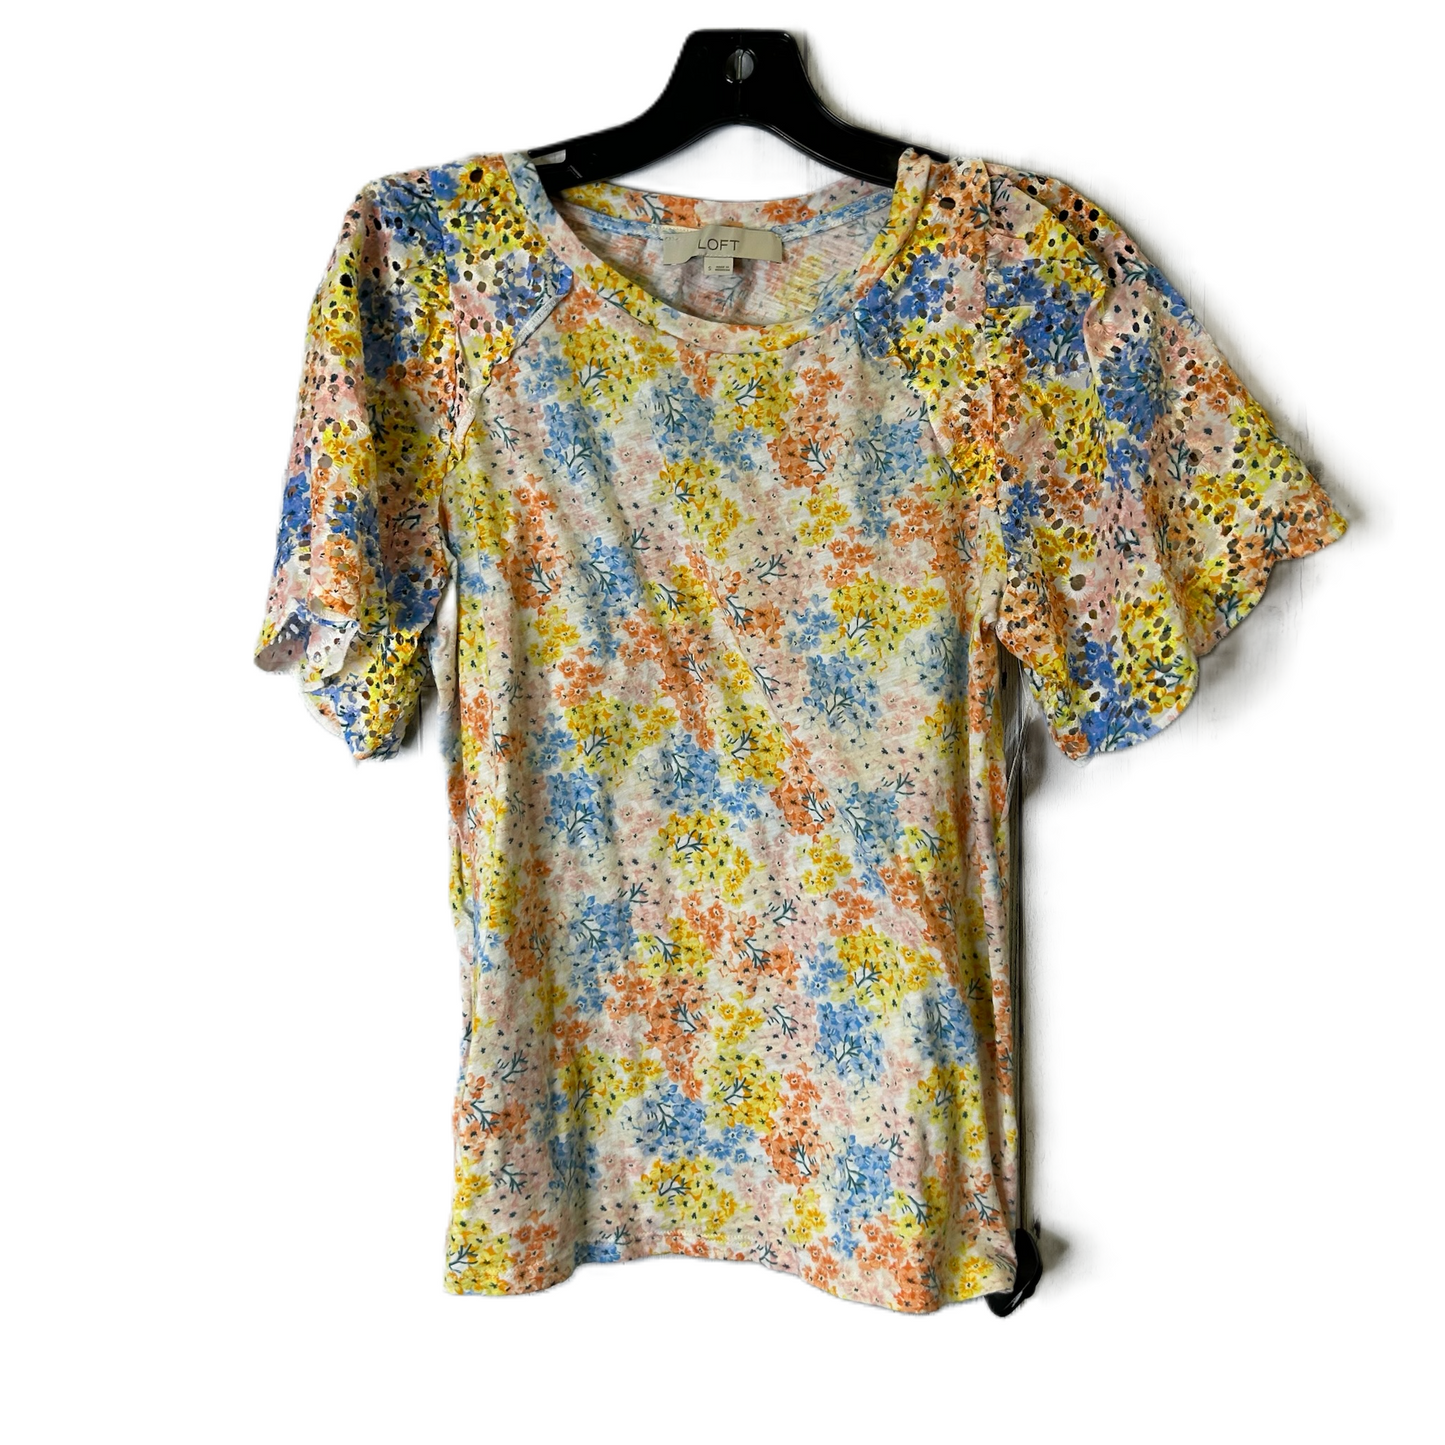 Floral Print Top Short Sleeve Basic By Loft, Size: S